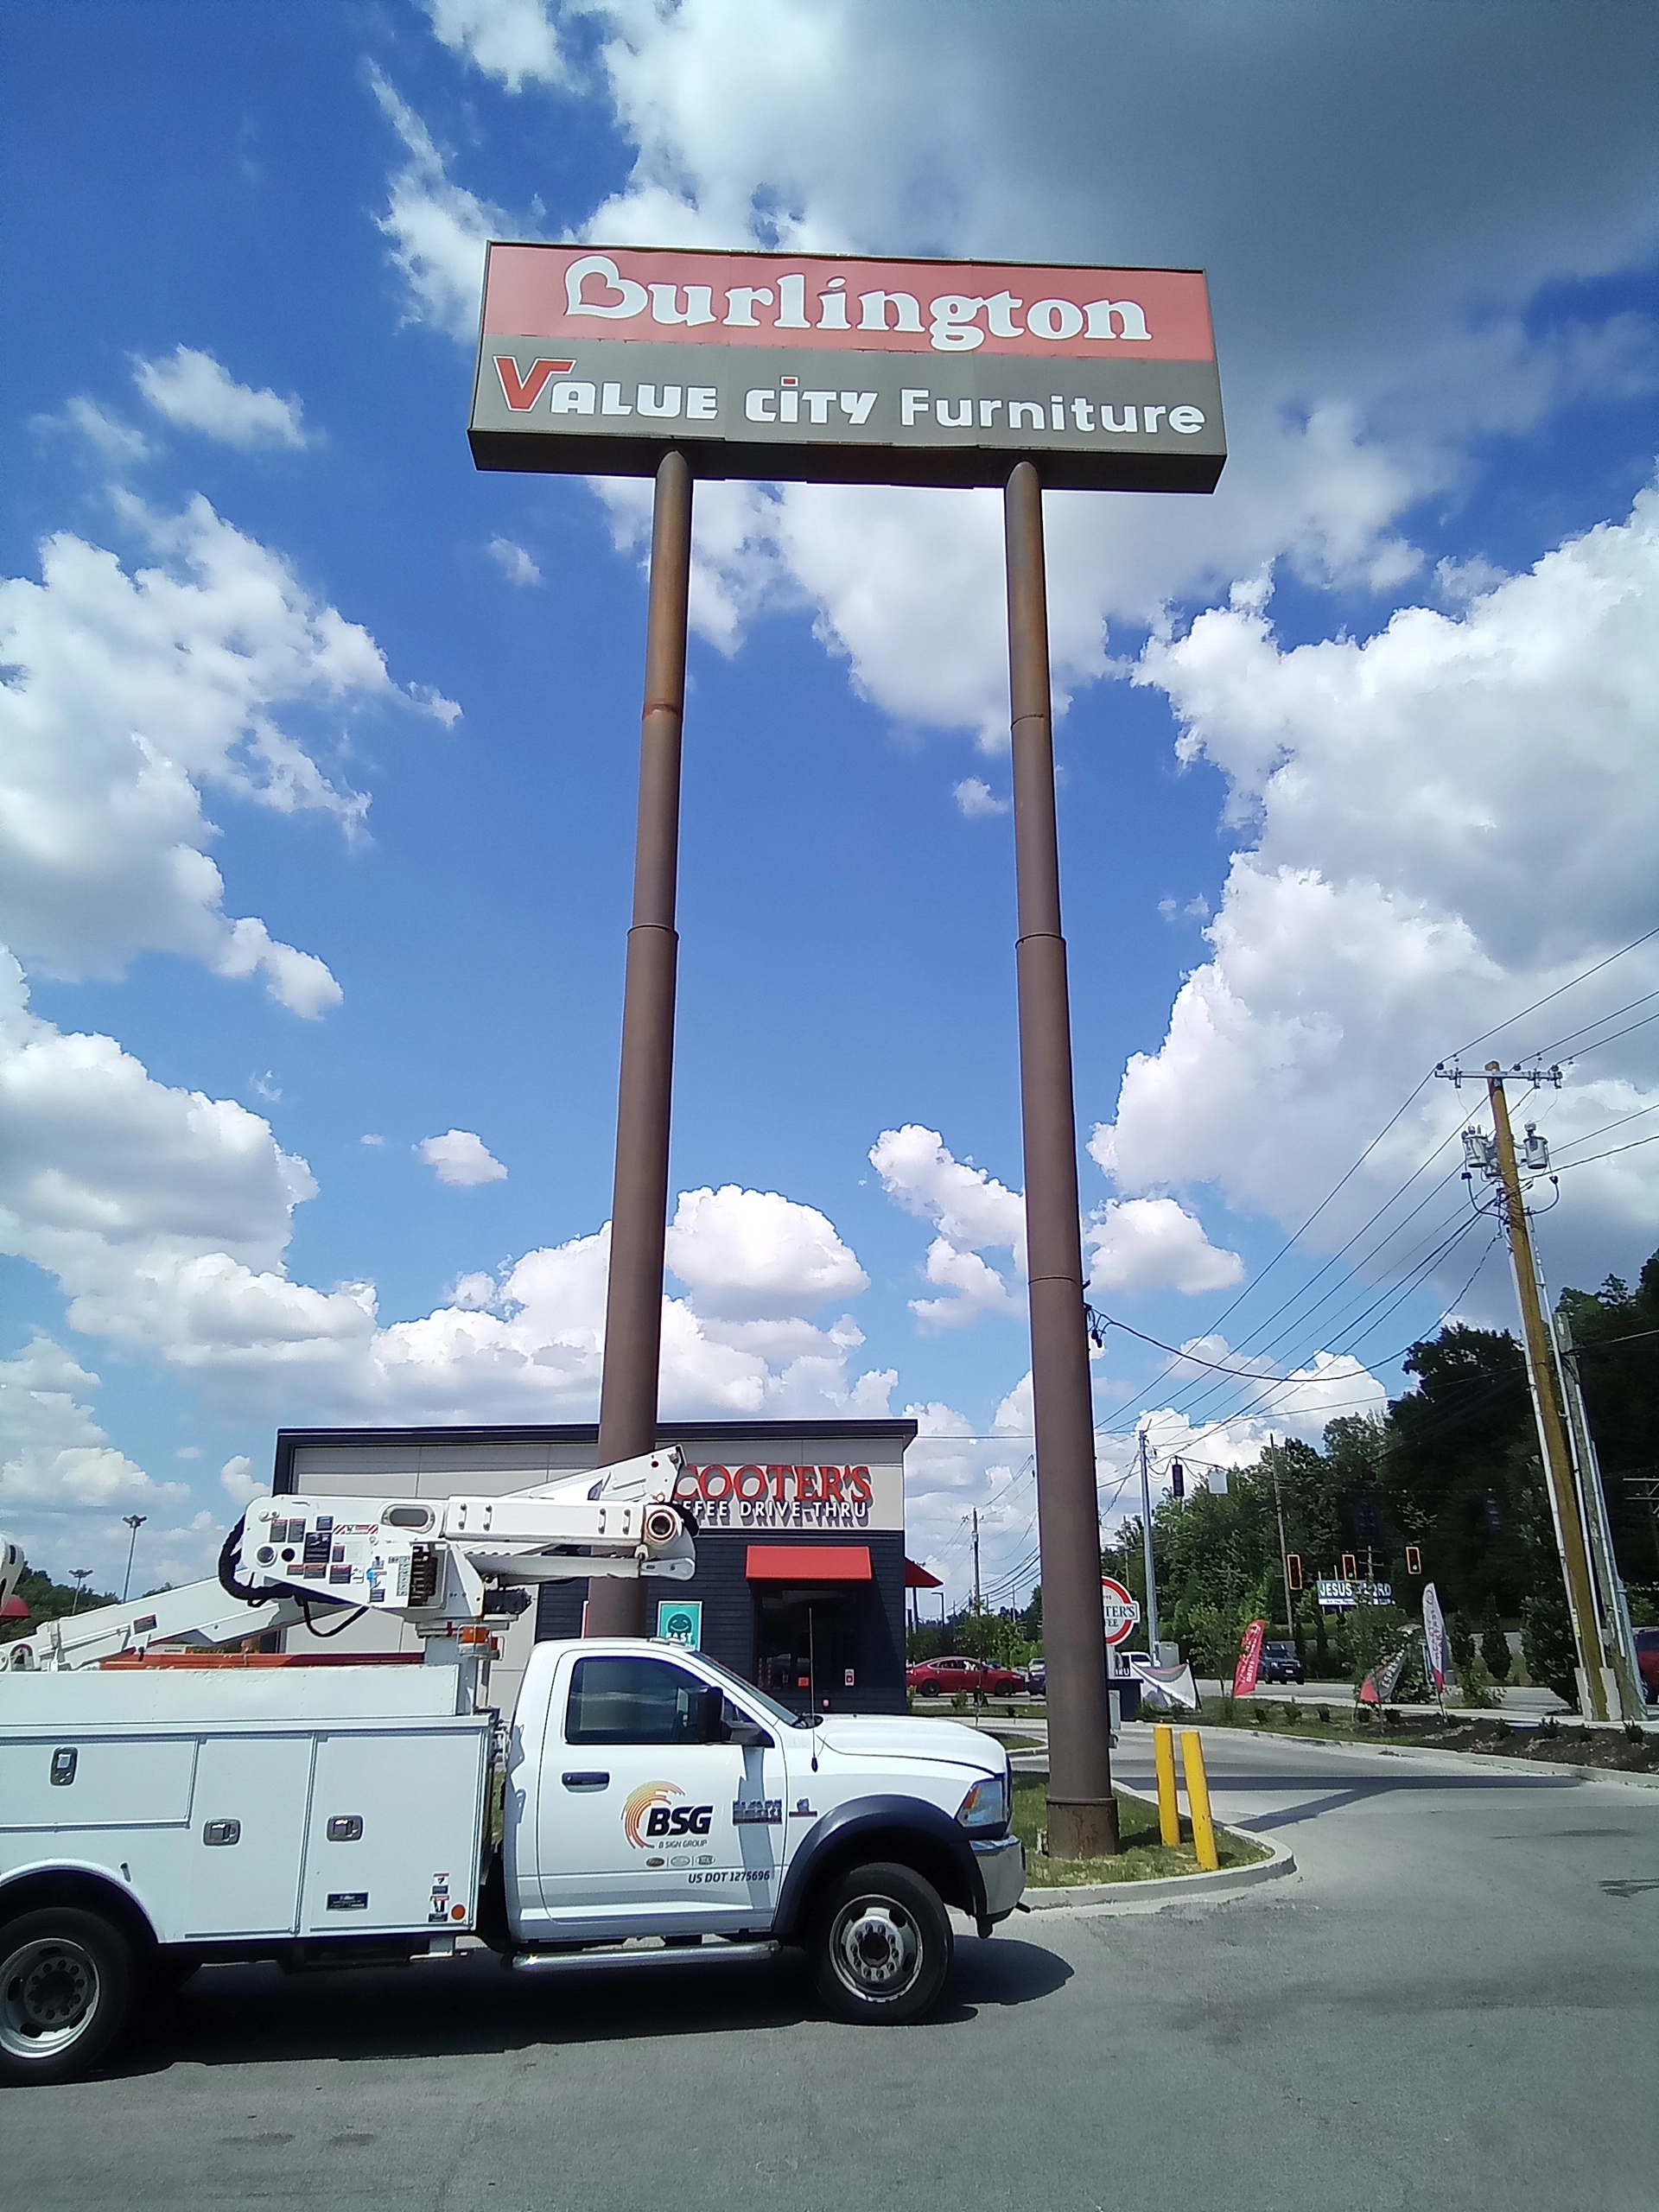 Sign service
 sign service and repair
crane lift
sign repair
ballast out
dead power supply
new bulbs
LED conversion
parking lot lights
day light savings
sign out 